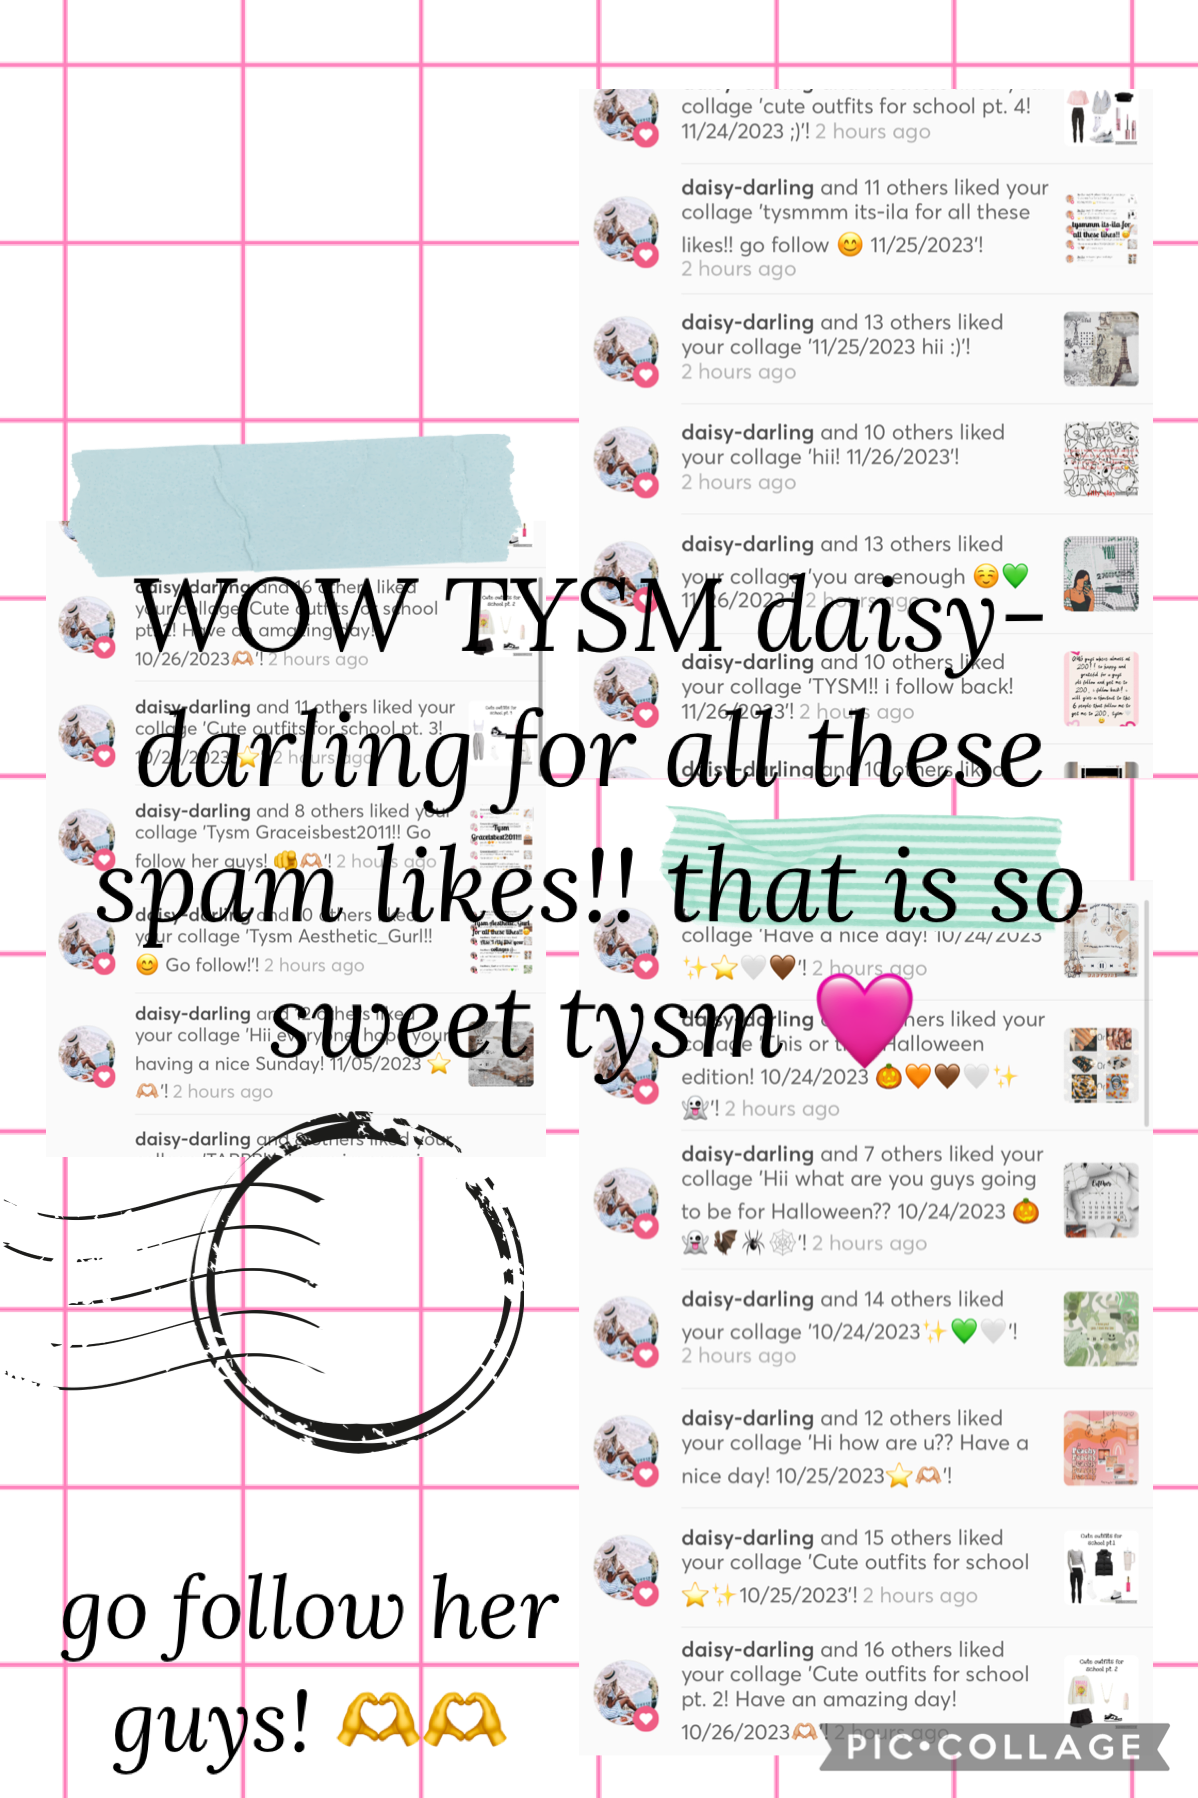 TYSM! daisy-darling <33 have a good day everyone! 11/27/2023